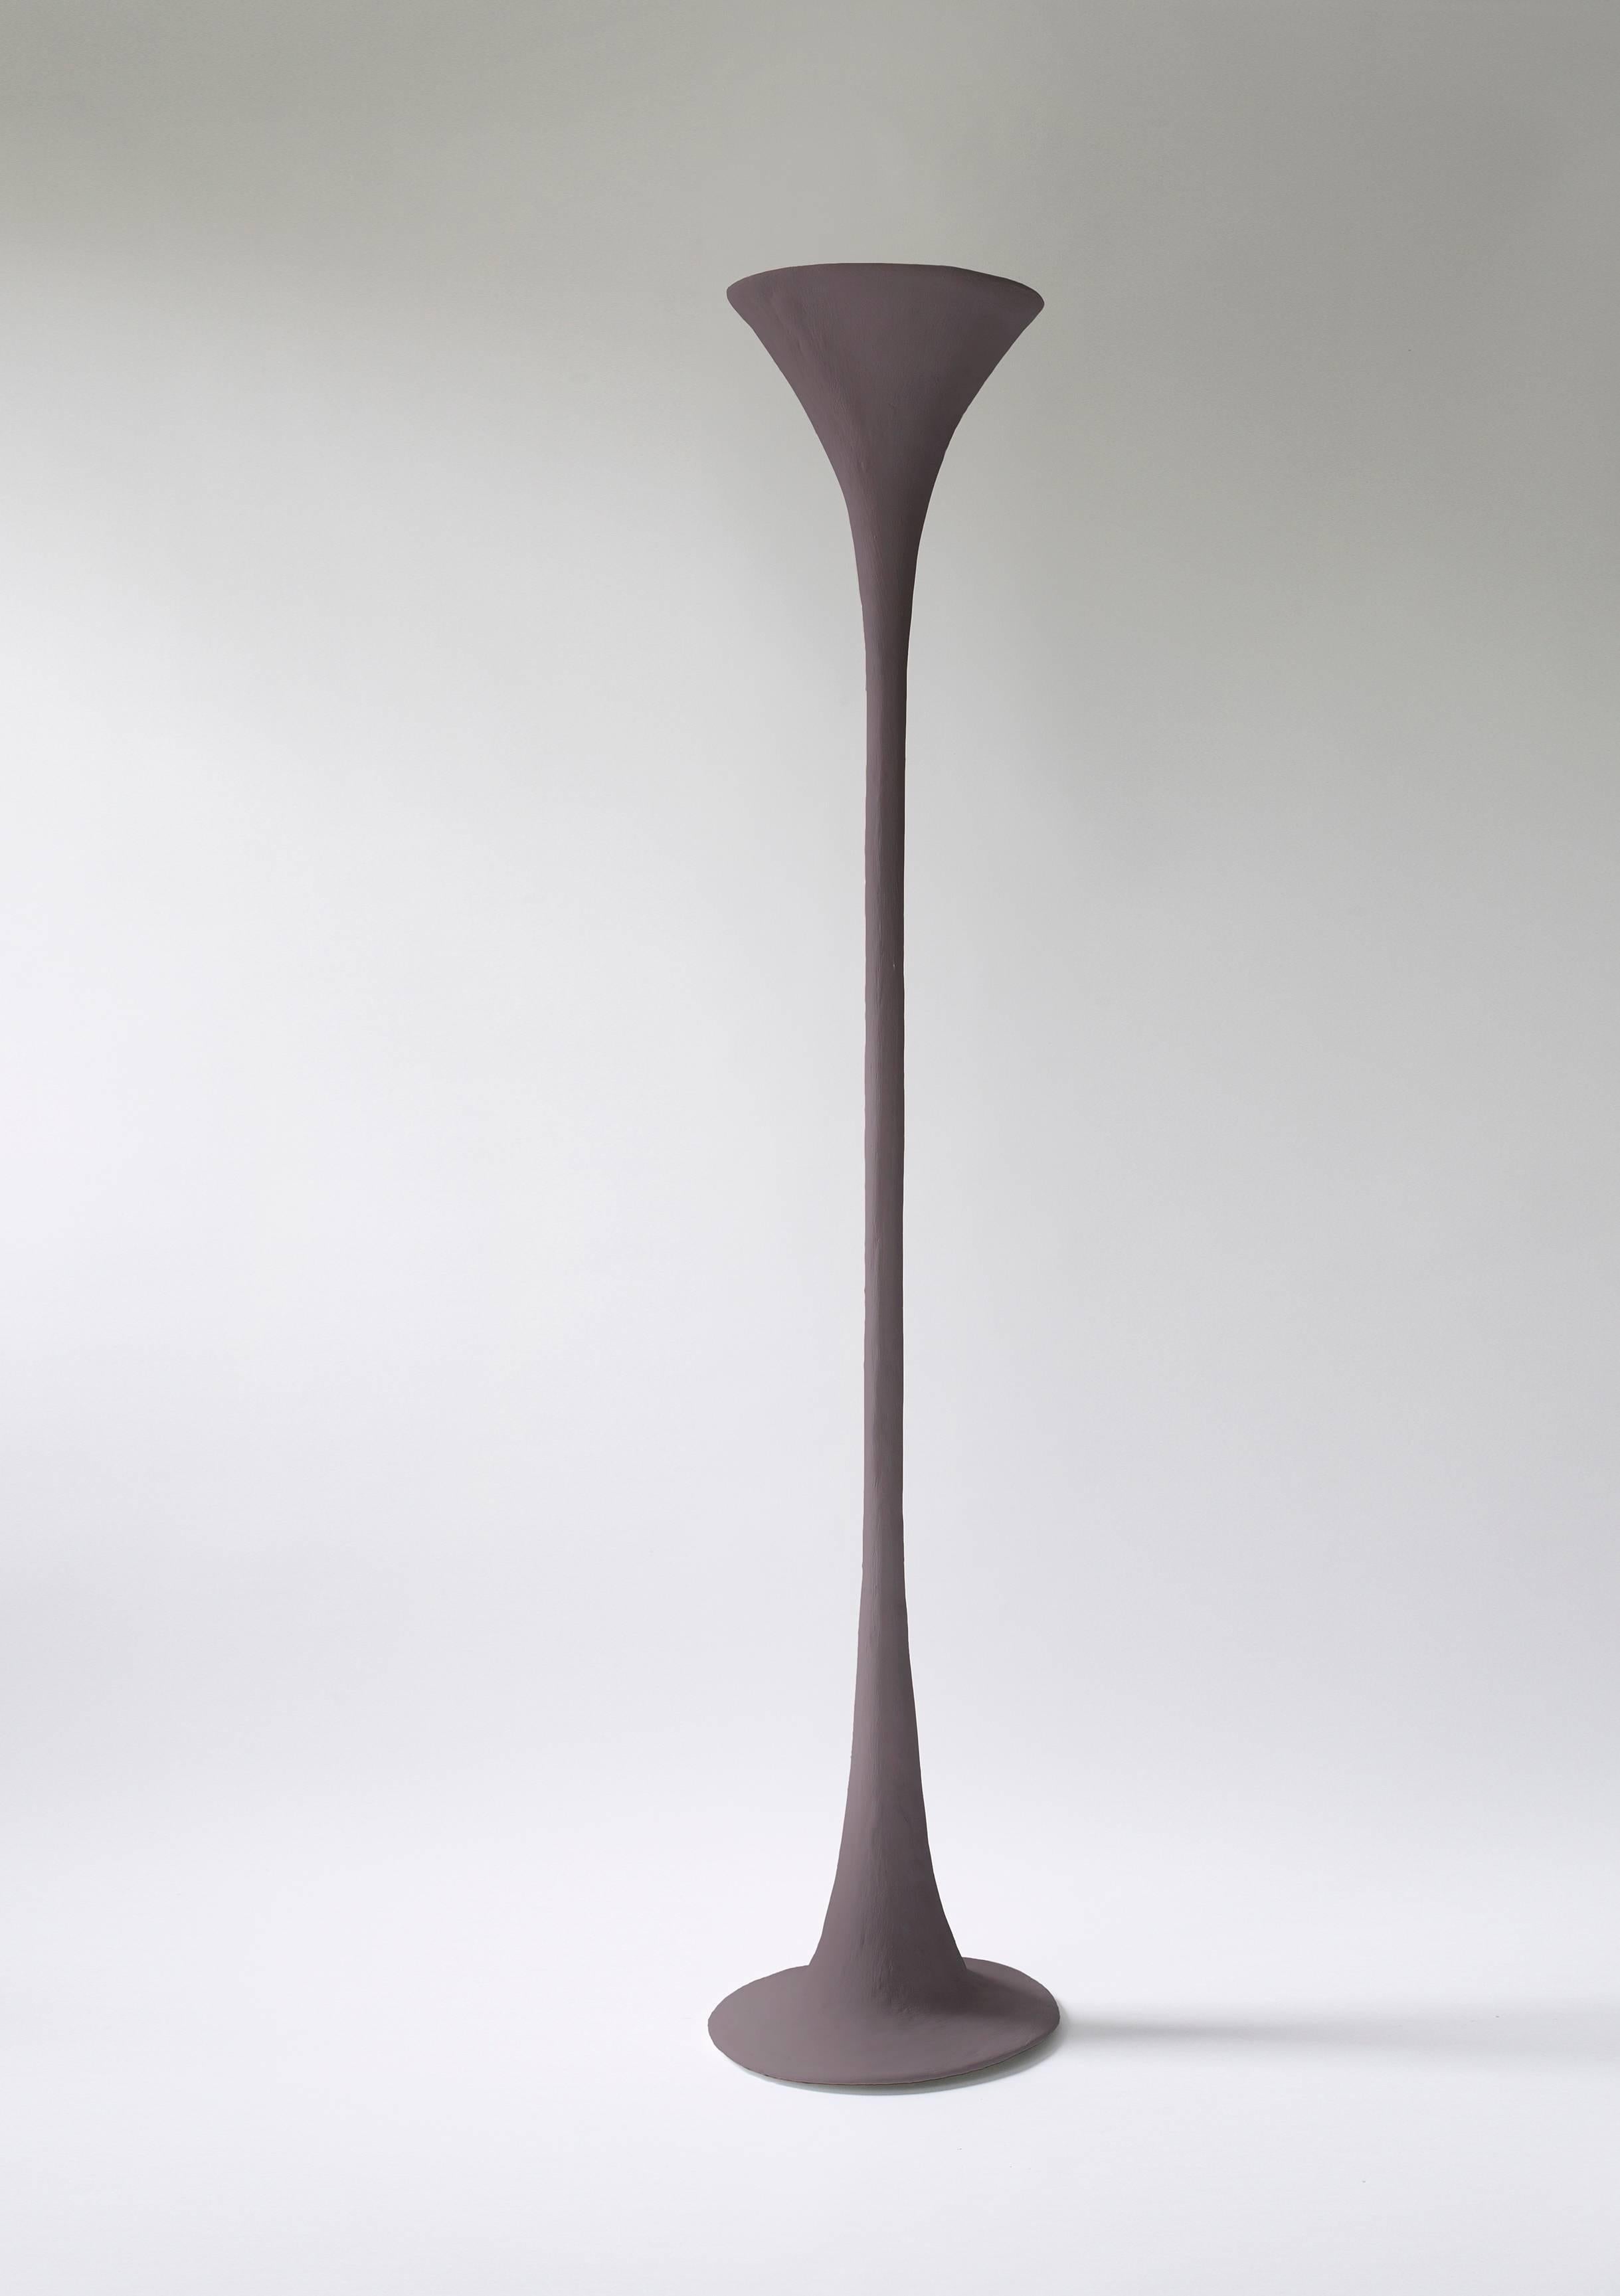 Referencing the historical lighting forms of Alberto and Diego Giacometti, this sculptural floor lamp has a quiet but distinct presence in any space. Very functional source of indirect lighting.

Shown in a Farrow & Ball brown.

Sold FOB New York.